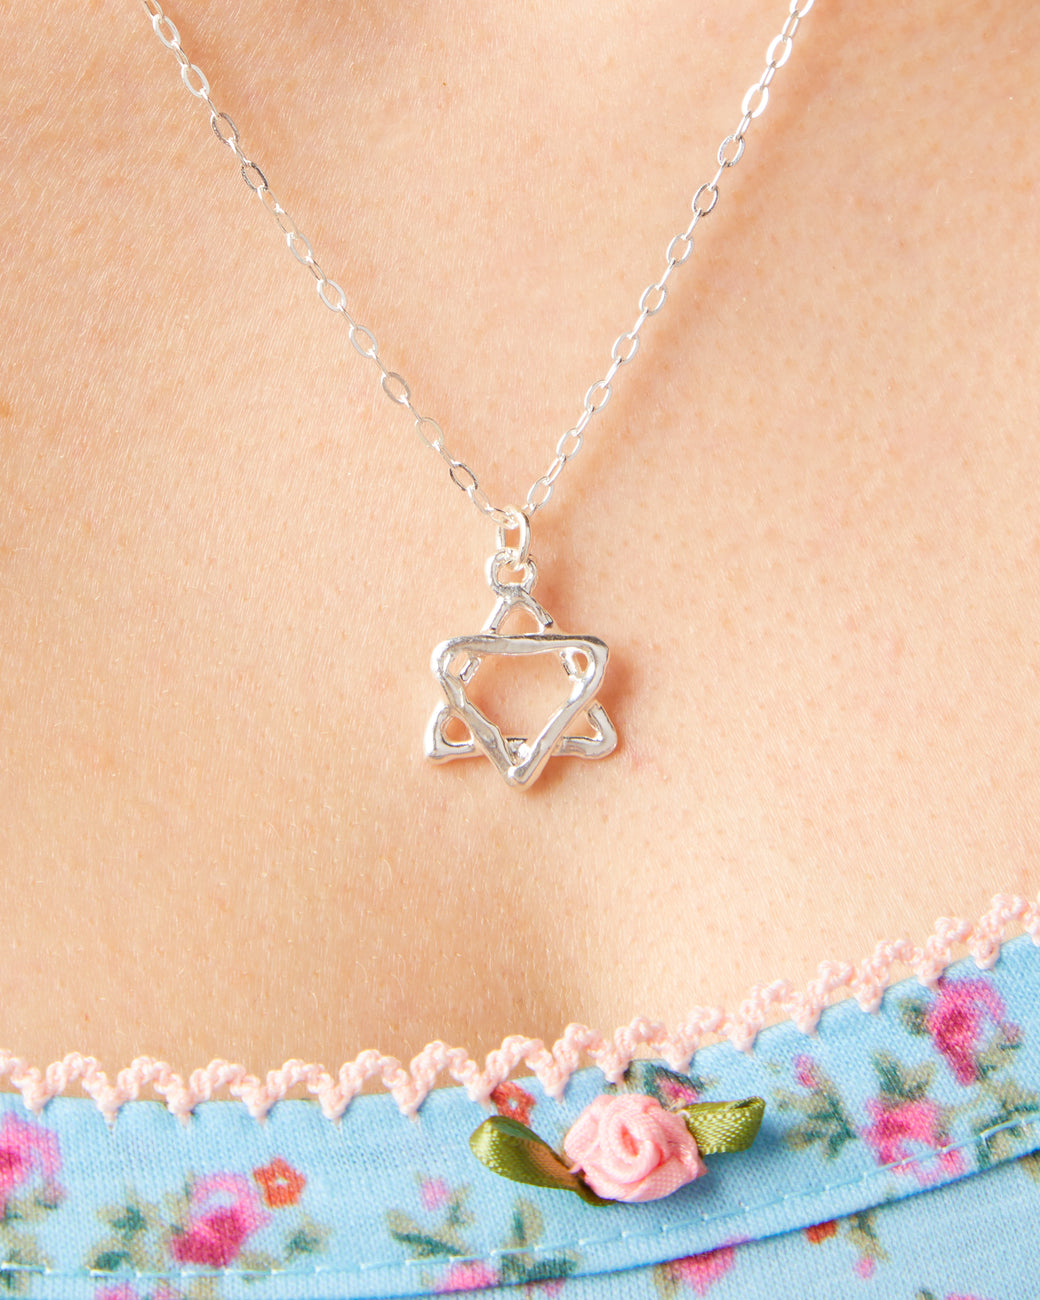 Judaica Necklace in Sterling Silver